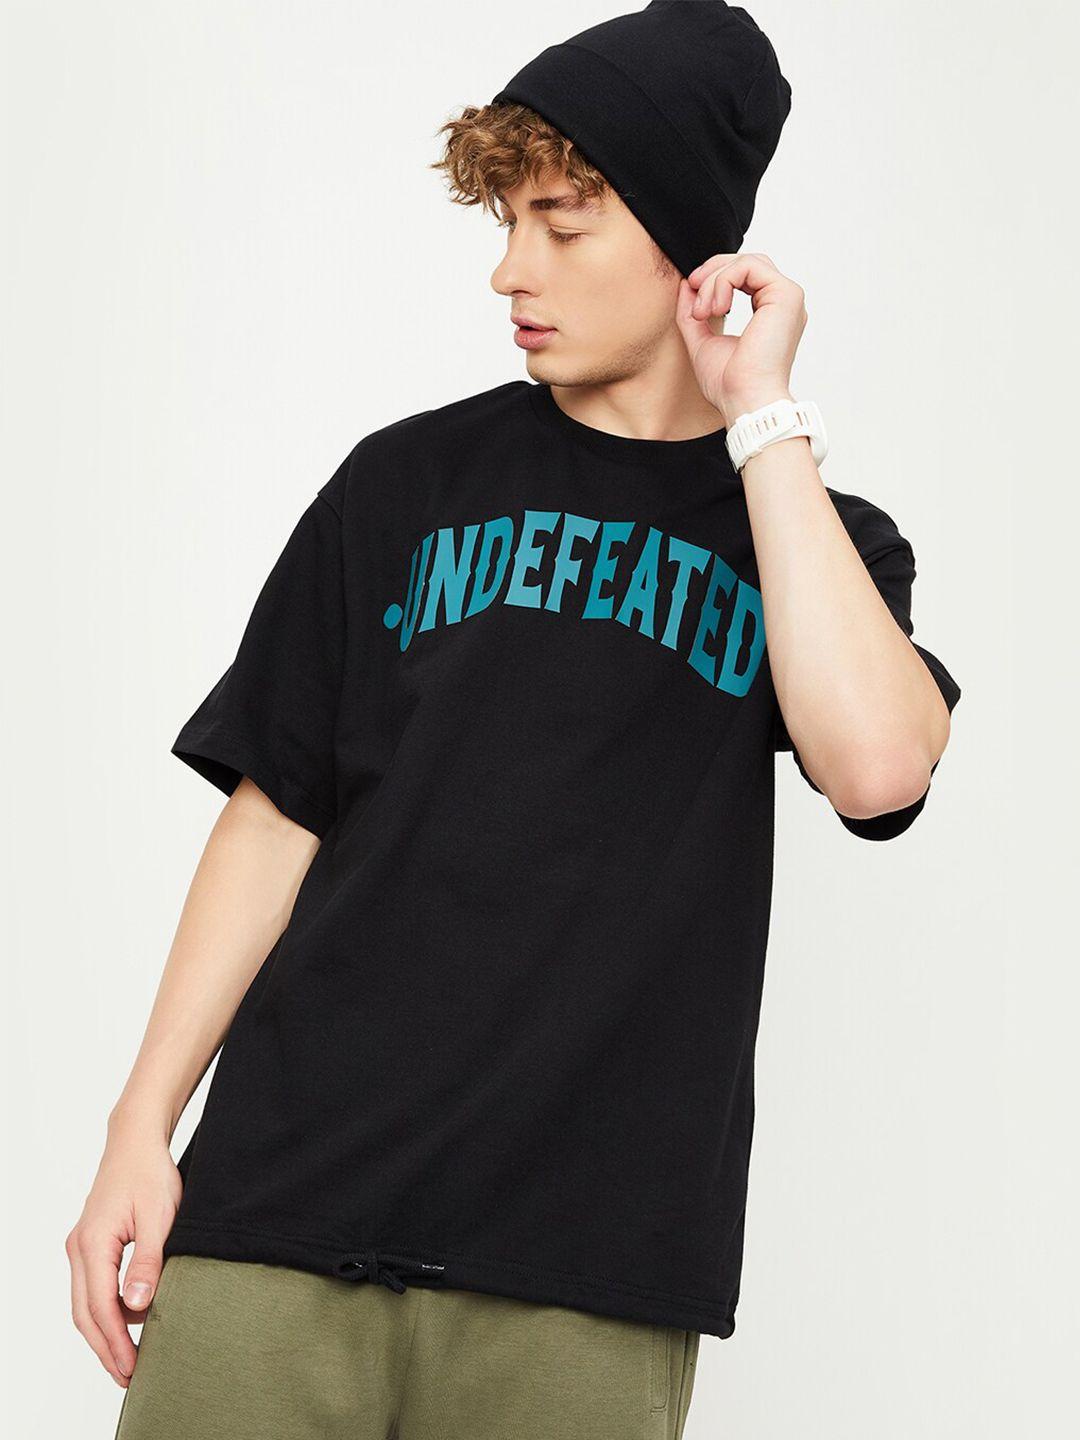 max typography printed pure cotton oversized t-shirt